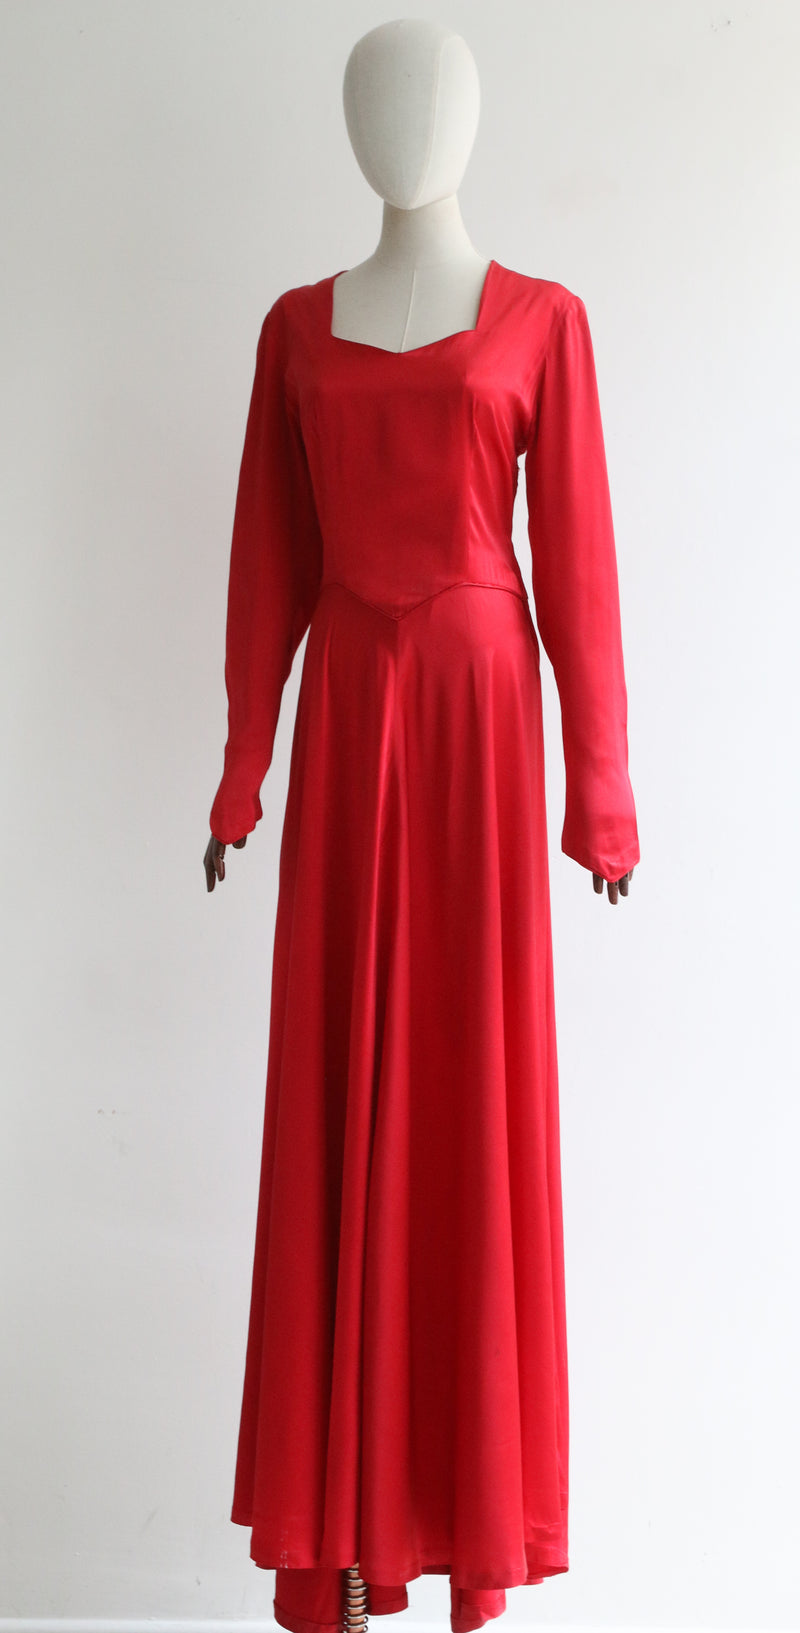 Red Plus Size Red Evening Dress Midi With Lace Applique, Square Neckline,  And Tea Length Hemline Perfect For Prom, Formal Events, Siyah Abiye, Or  Special Occasions From Verycute, $50.13 | DHgate.Com